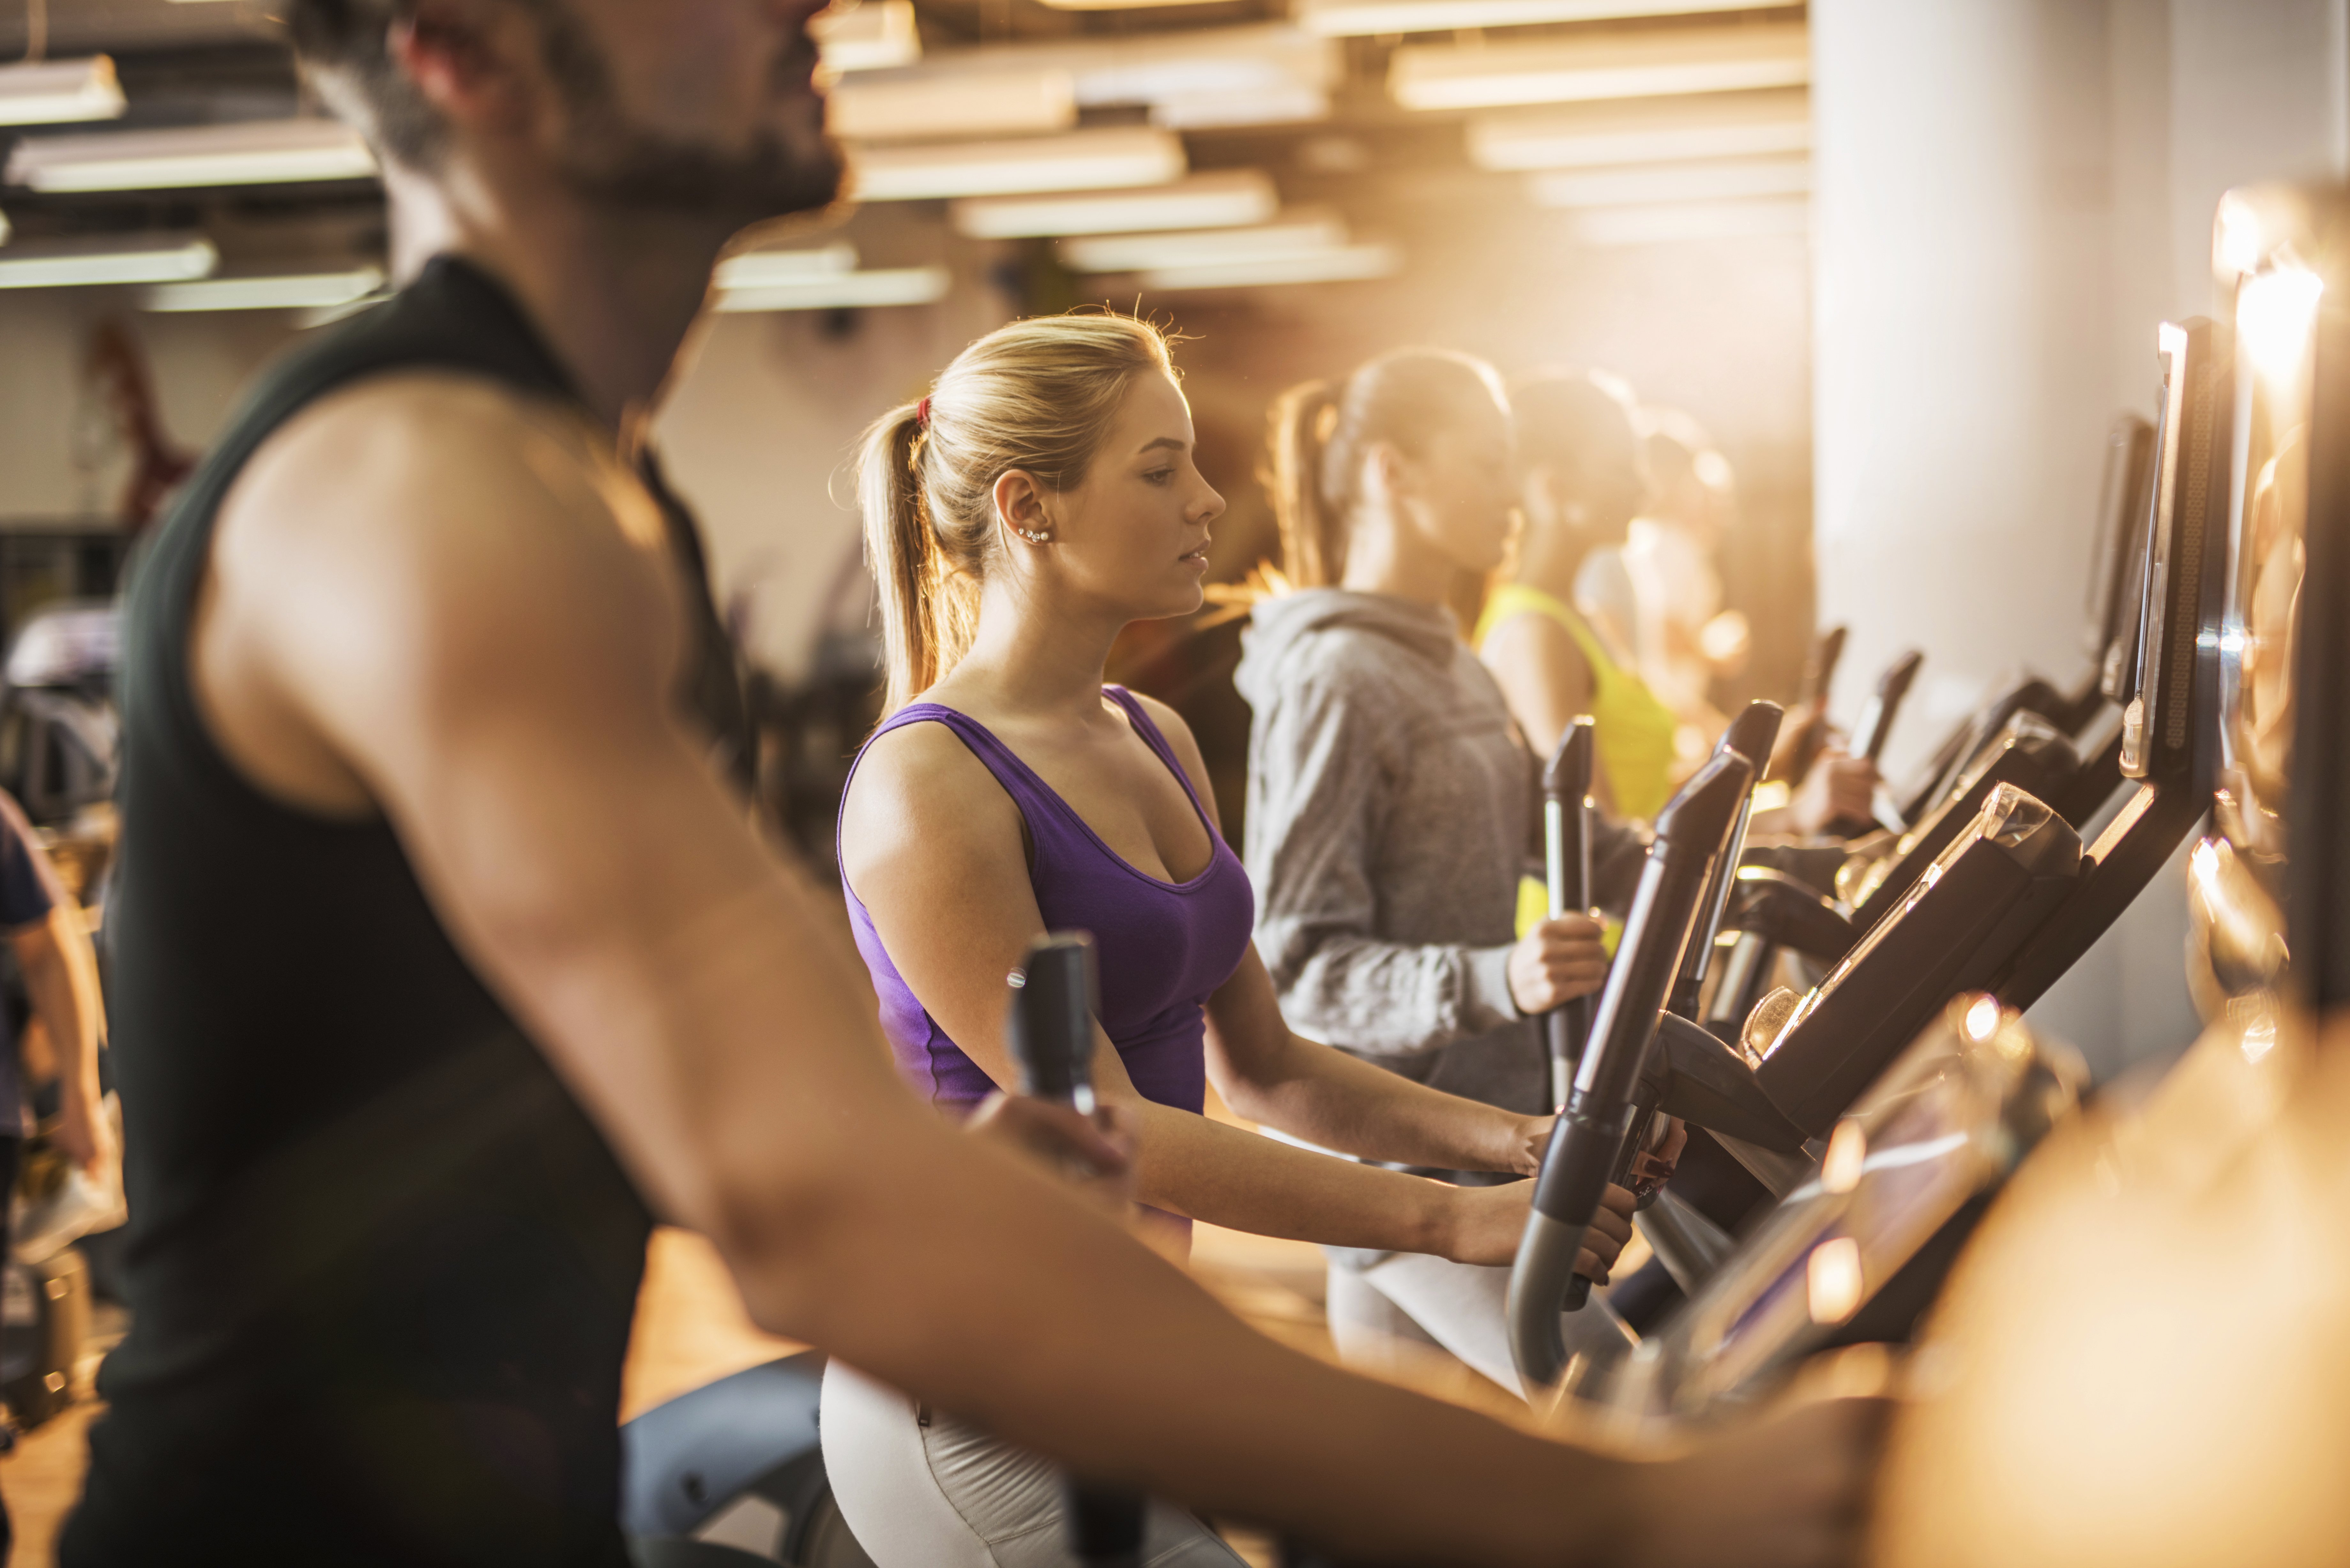 Group of people exercising on exercise machine in a gym.